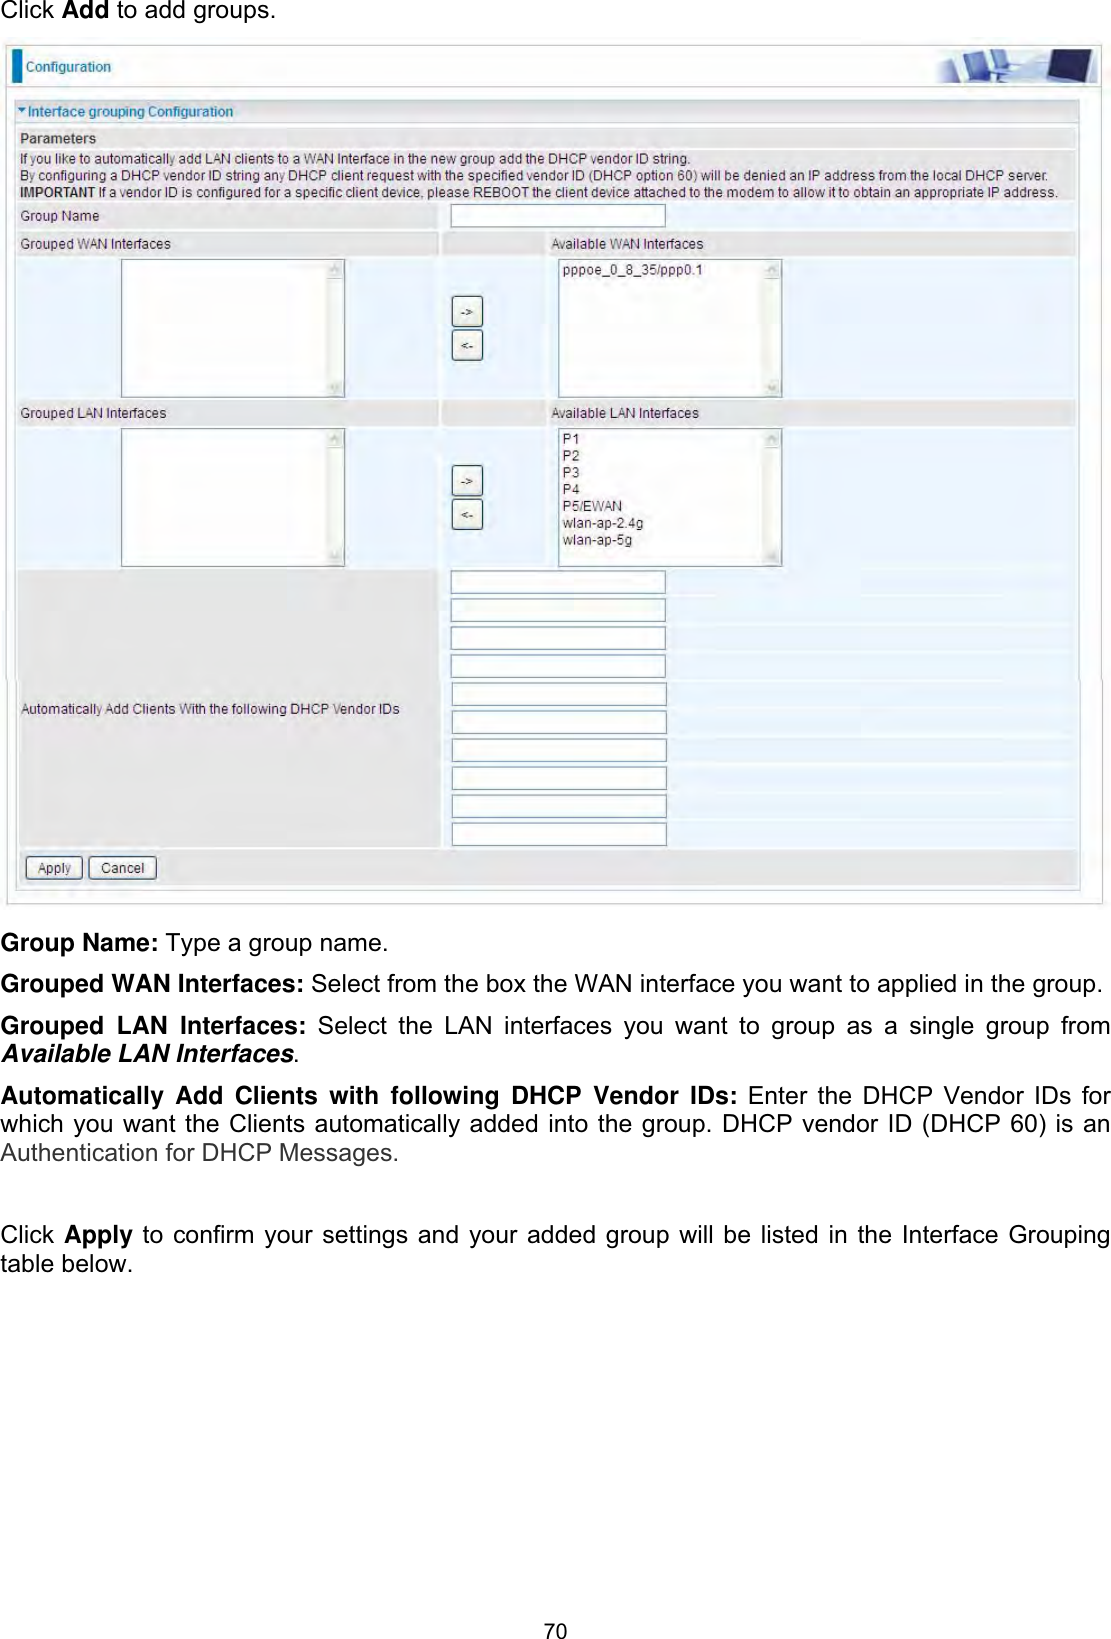 70Click Add to add groups.Group Name: Type a group name. Grouped WAN Interfaces: Select from the box the WAN interface you want to applied in the group. Grouped LAN Interfaces: Select the LAN interfaces you want to group as a single group from Available LAN Interfaces.Automatically Add Clients with following DHCP Vendor IDs: Enter the DHCP Vendor IDs for which you want the Clients automatically added into the group. DHCP vendor ID (DHCP 60) is an Authentication for DHCP Messages.Click Apply to confirm your settings and your added group will be listed in the Interface Grouping table below. 